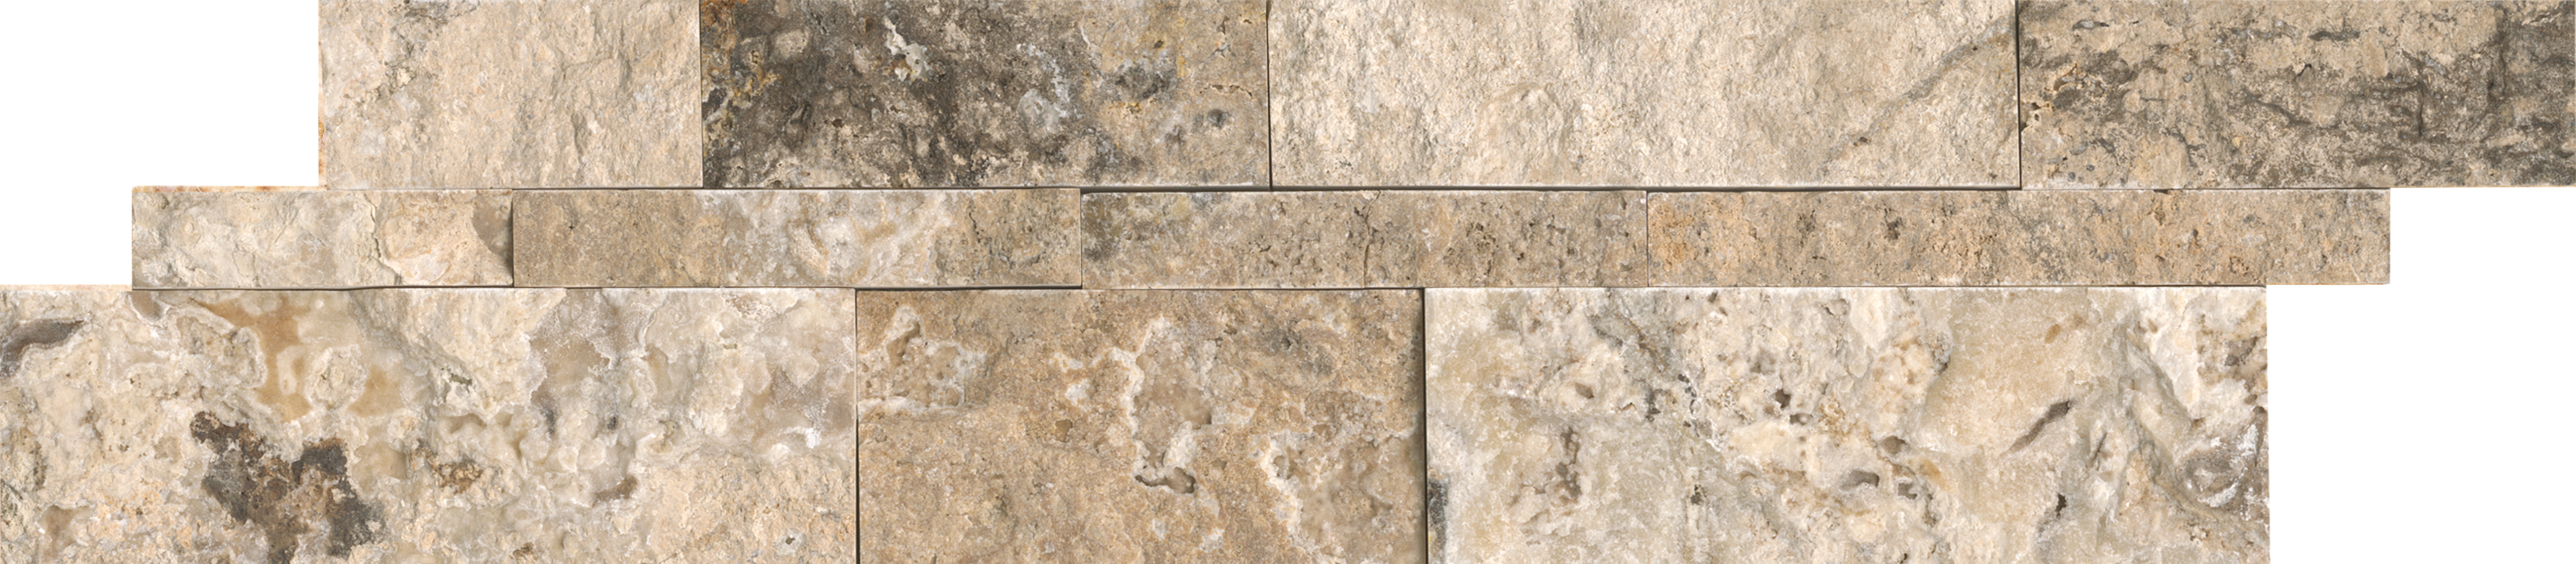 travertine picasso pattern natural stone wall panel from cubics anatolia collection distributed by surface group international split face finish straight edge edge 6x24 interlocking shape